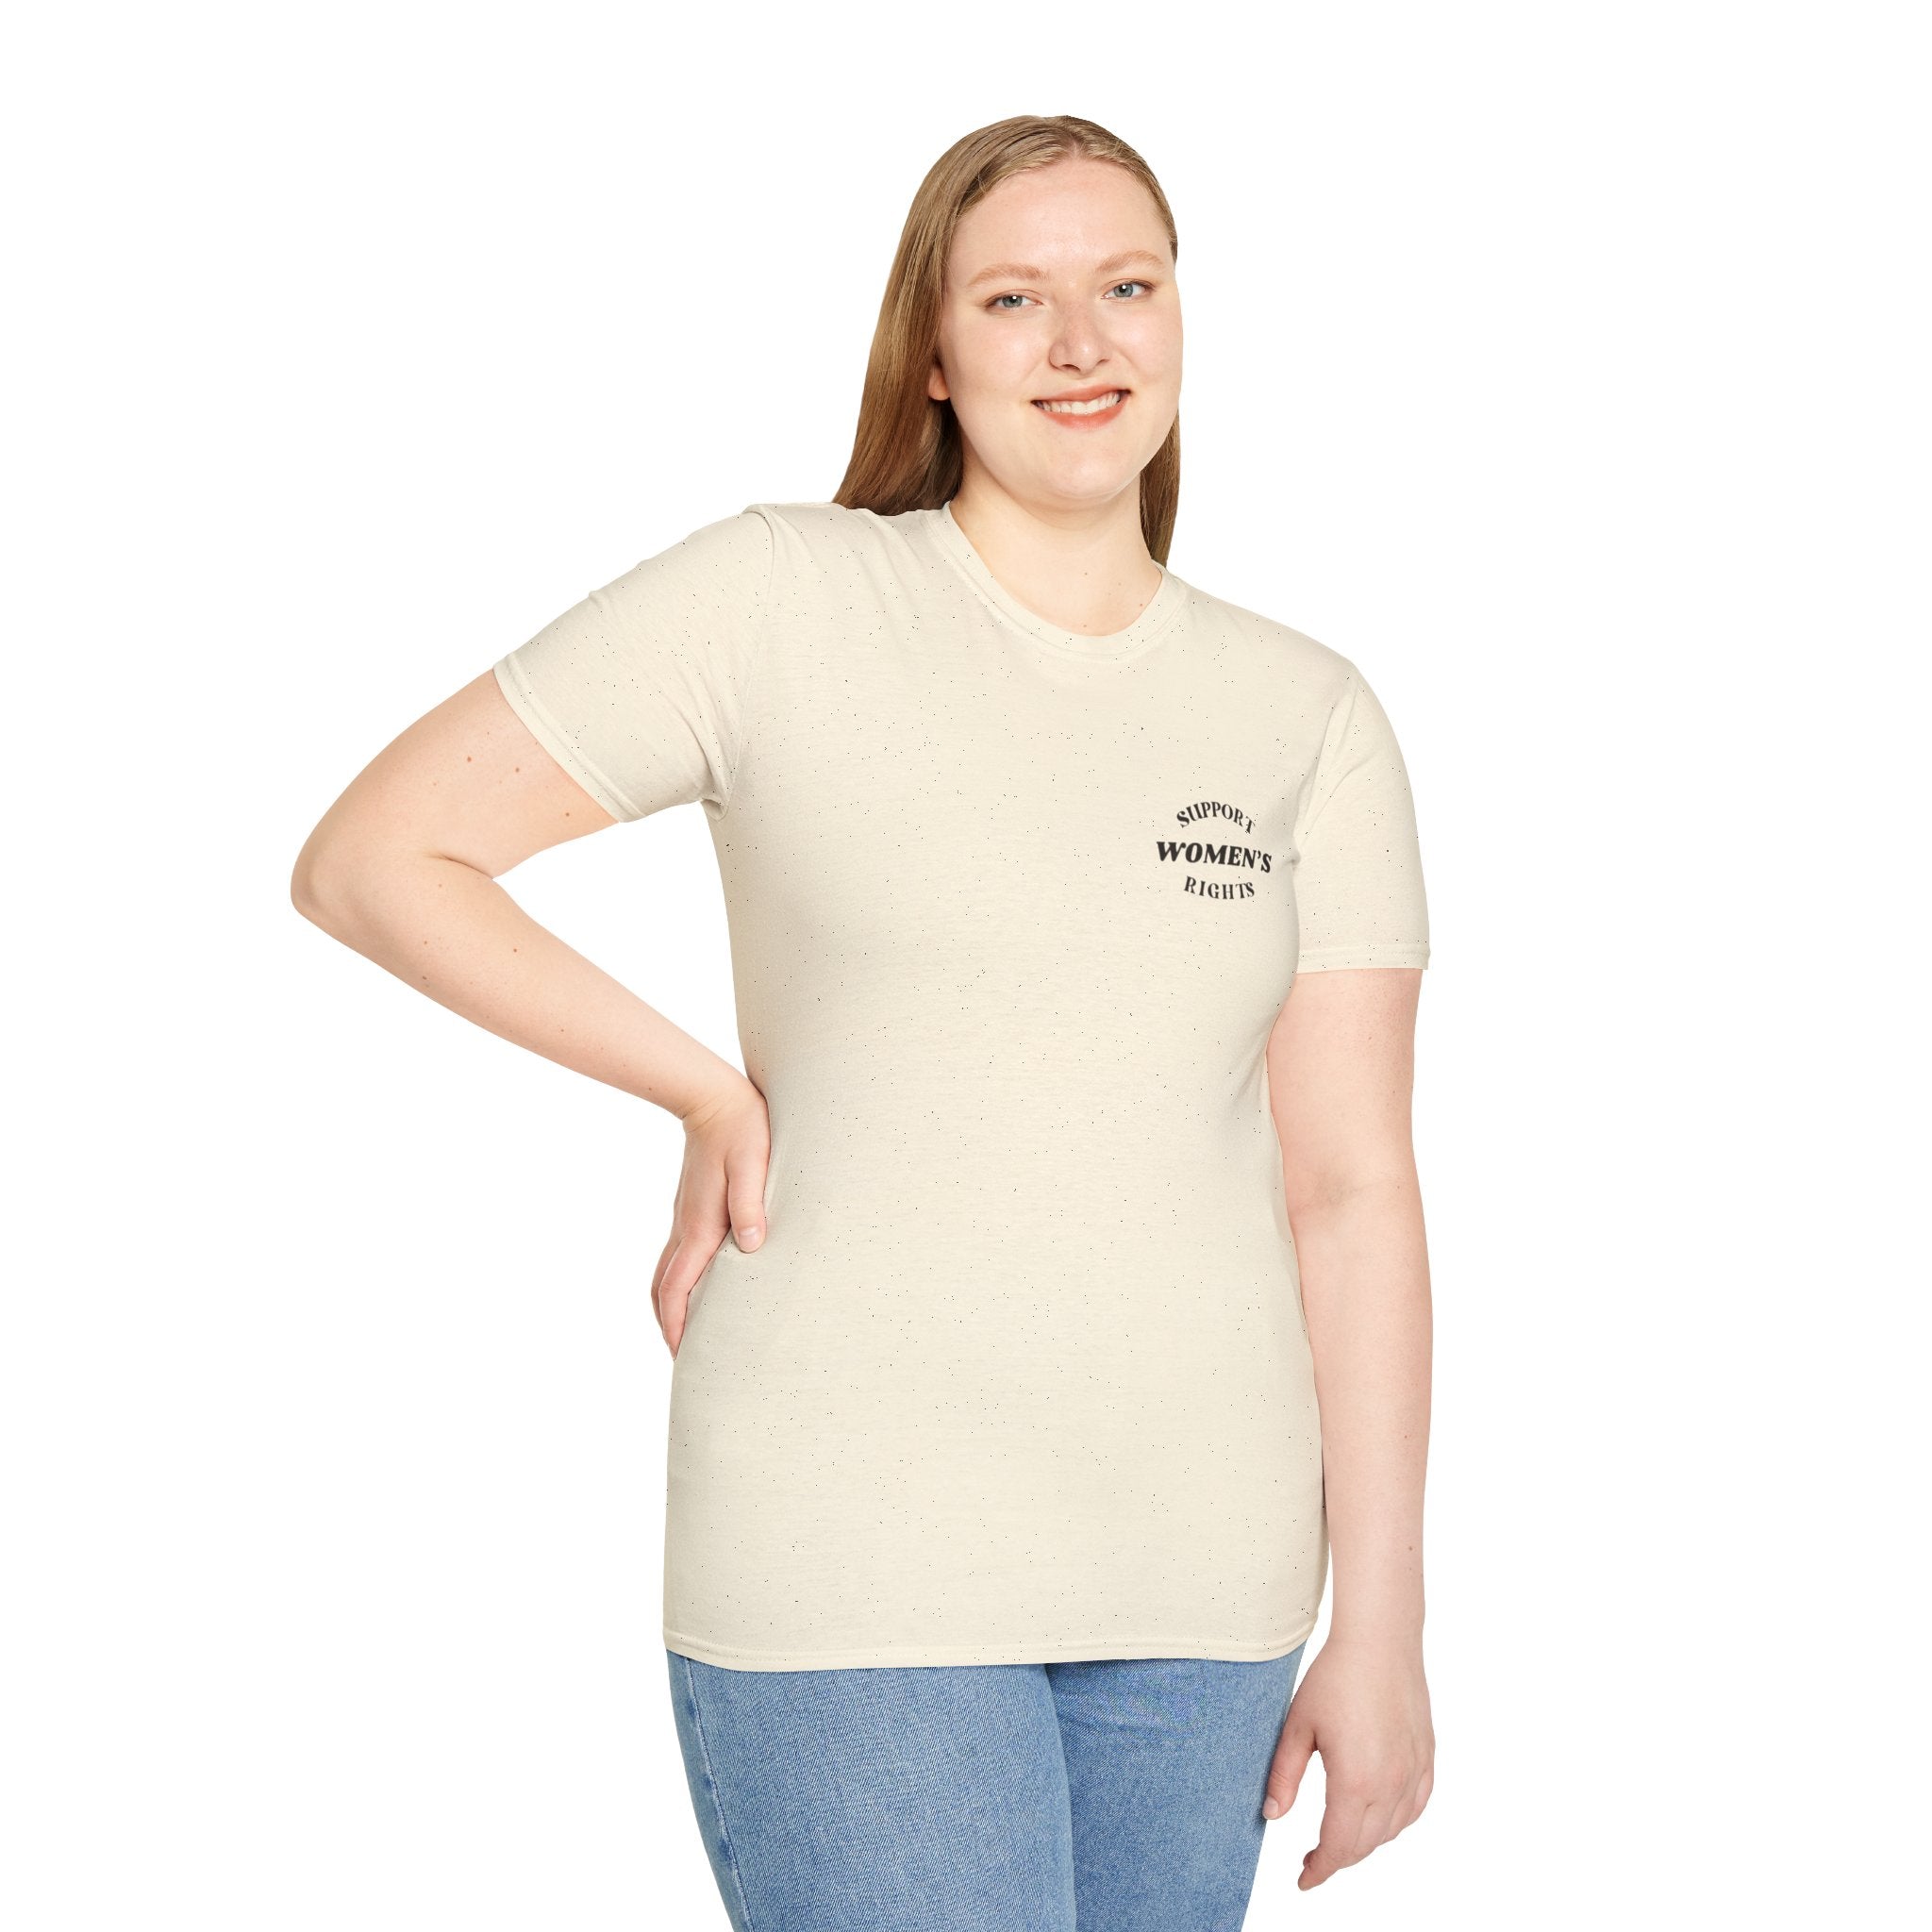 Support Women's Rights Unisex Softstyle T-Shirt